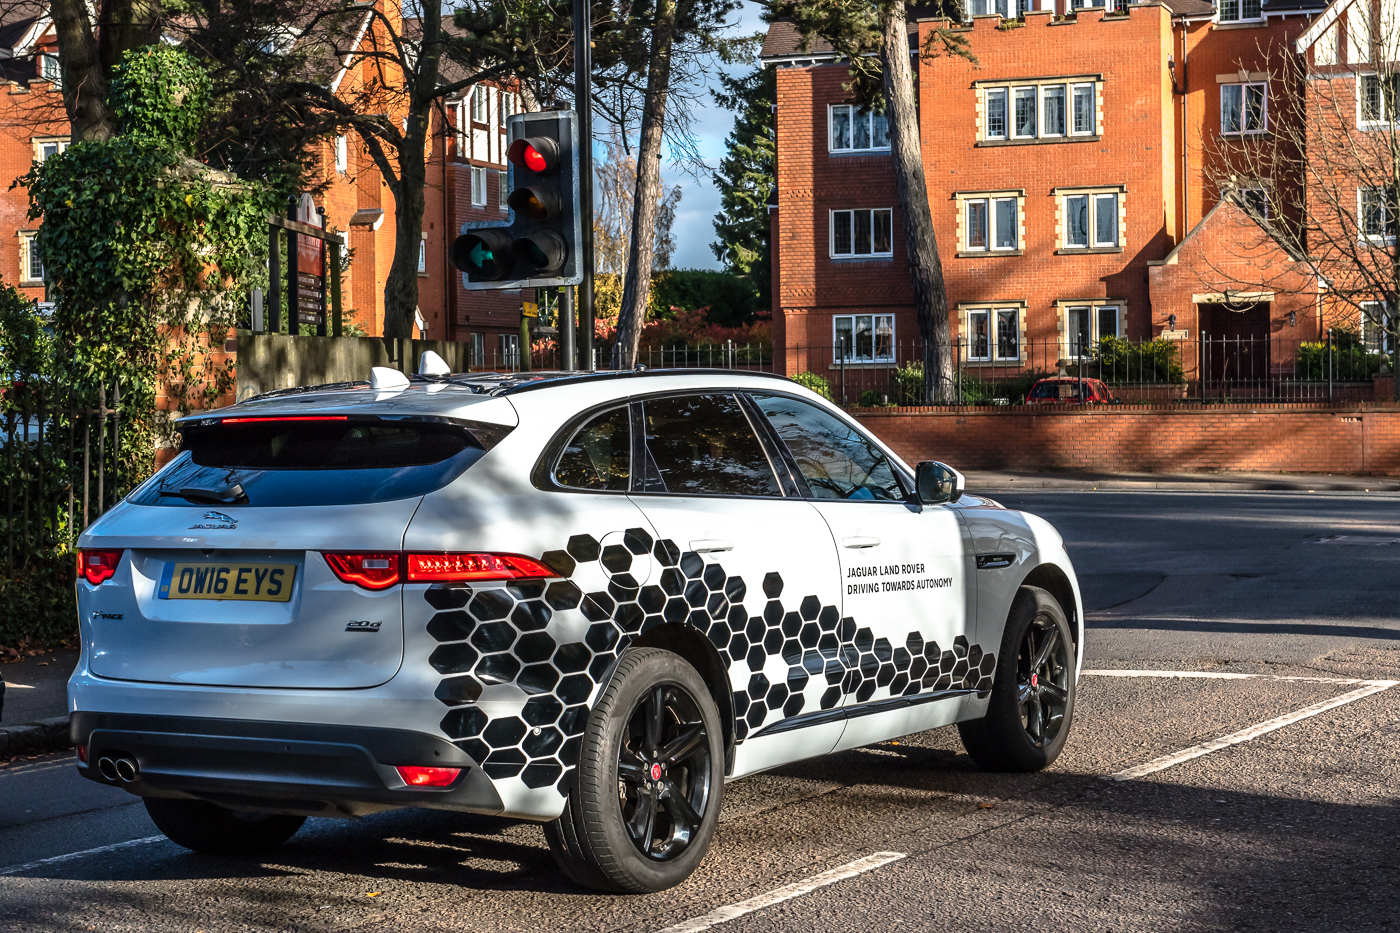 £19m boost for region’s self-driving vehicle sector